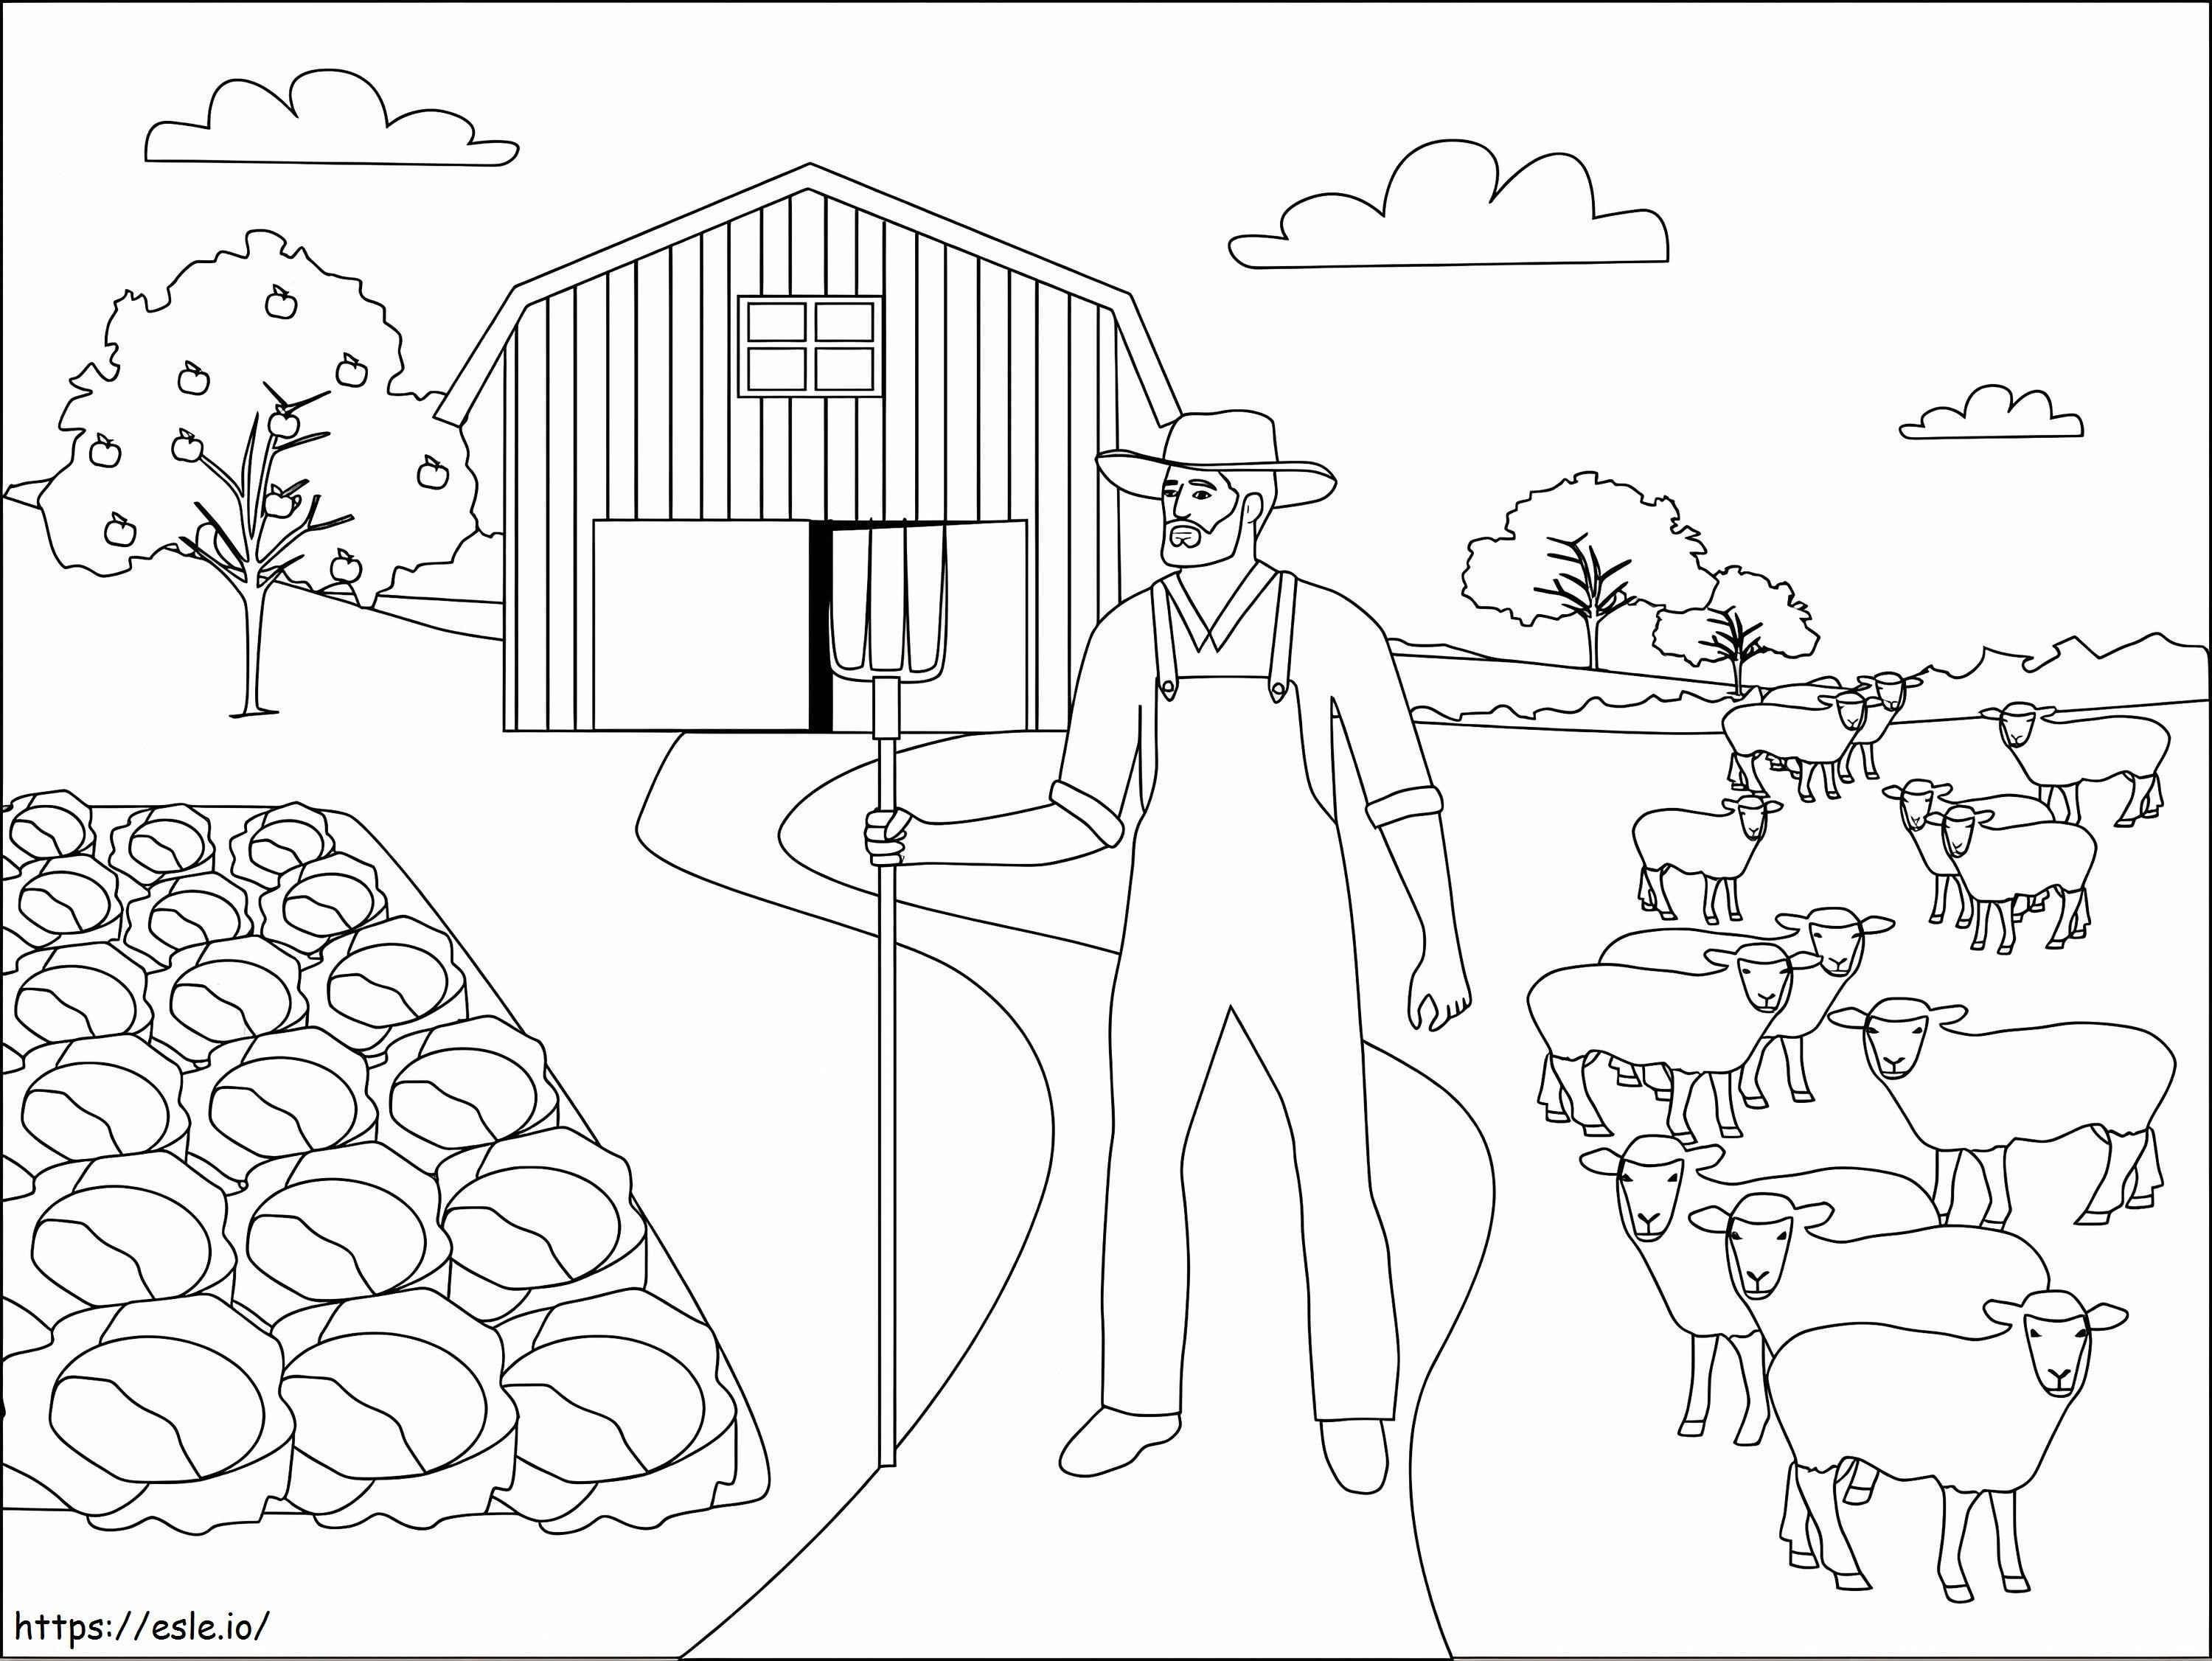 Farm And Farmer coloring page